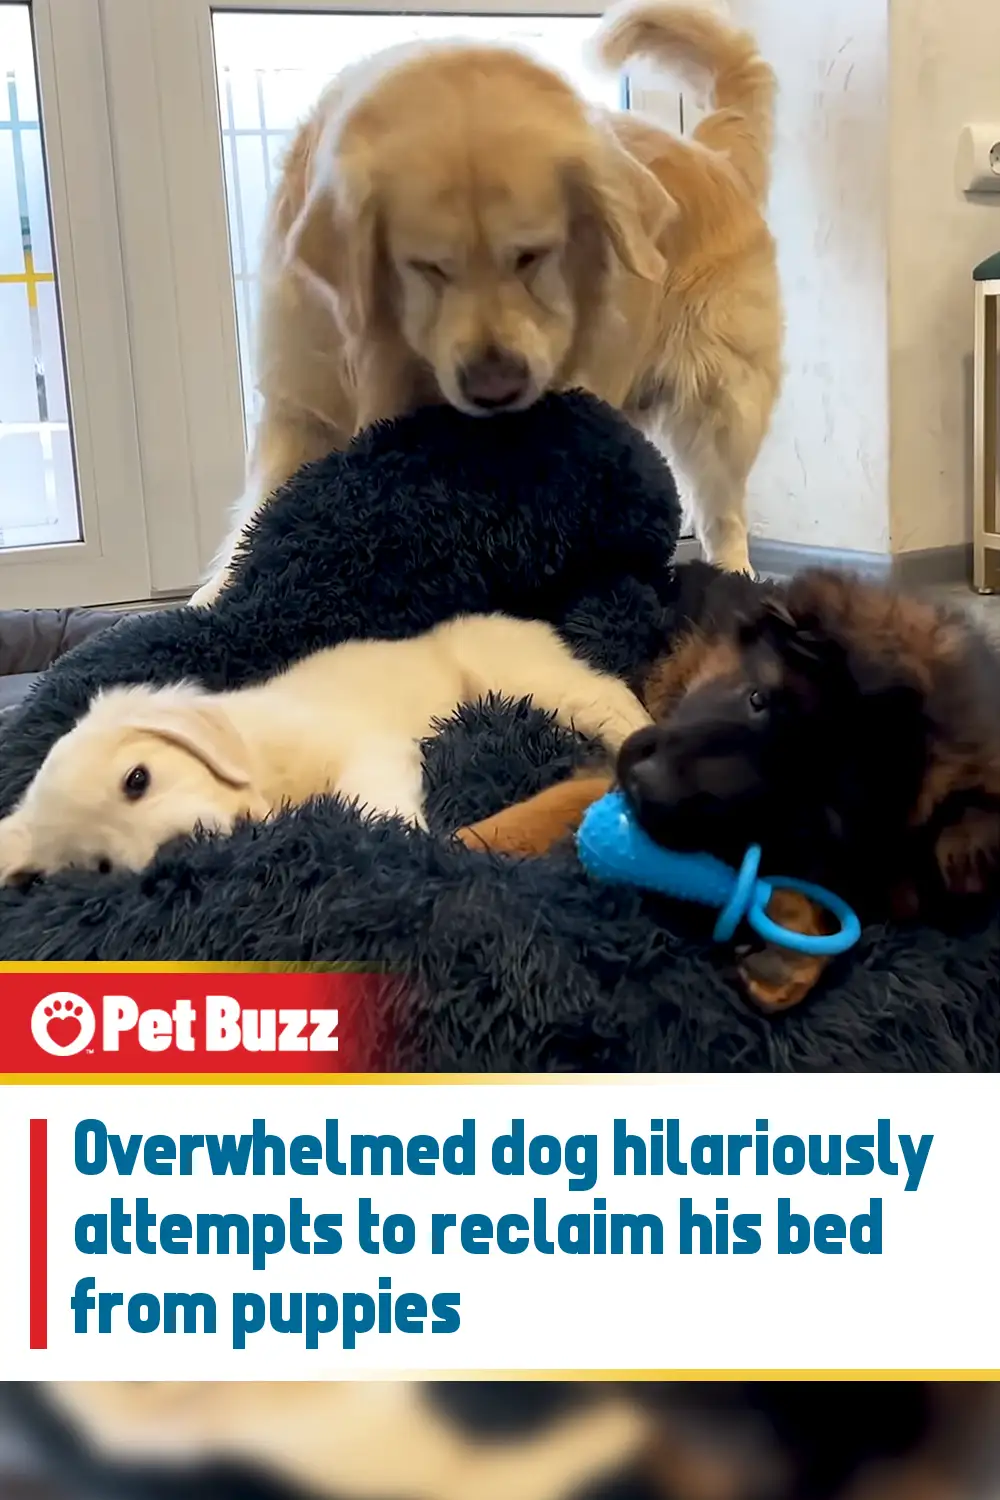 Overwhelmed dog hilariously attempts to reclaim his bed from puppies